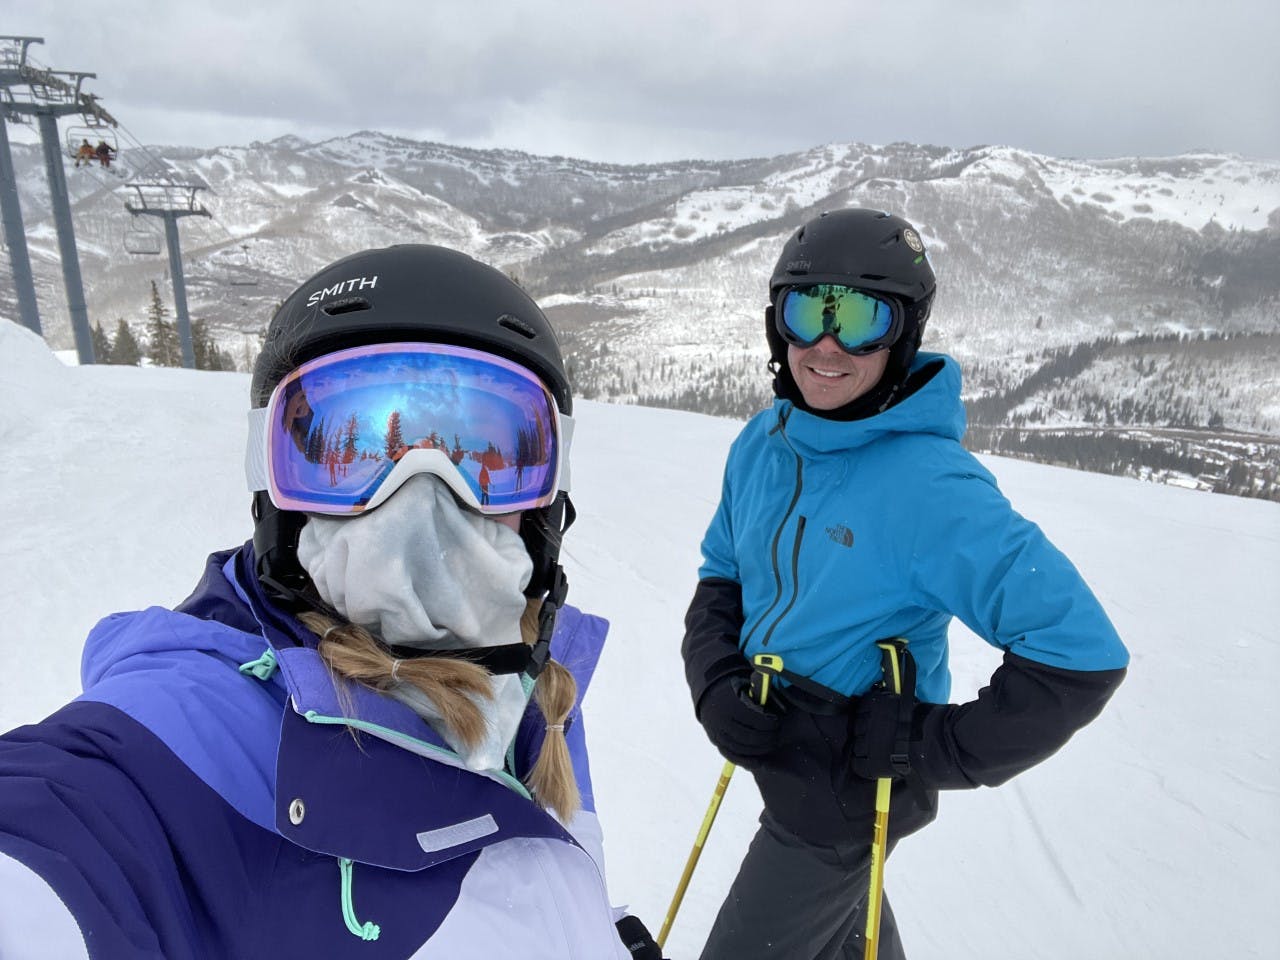 Two skiers on a run at a ski resort. 